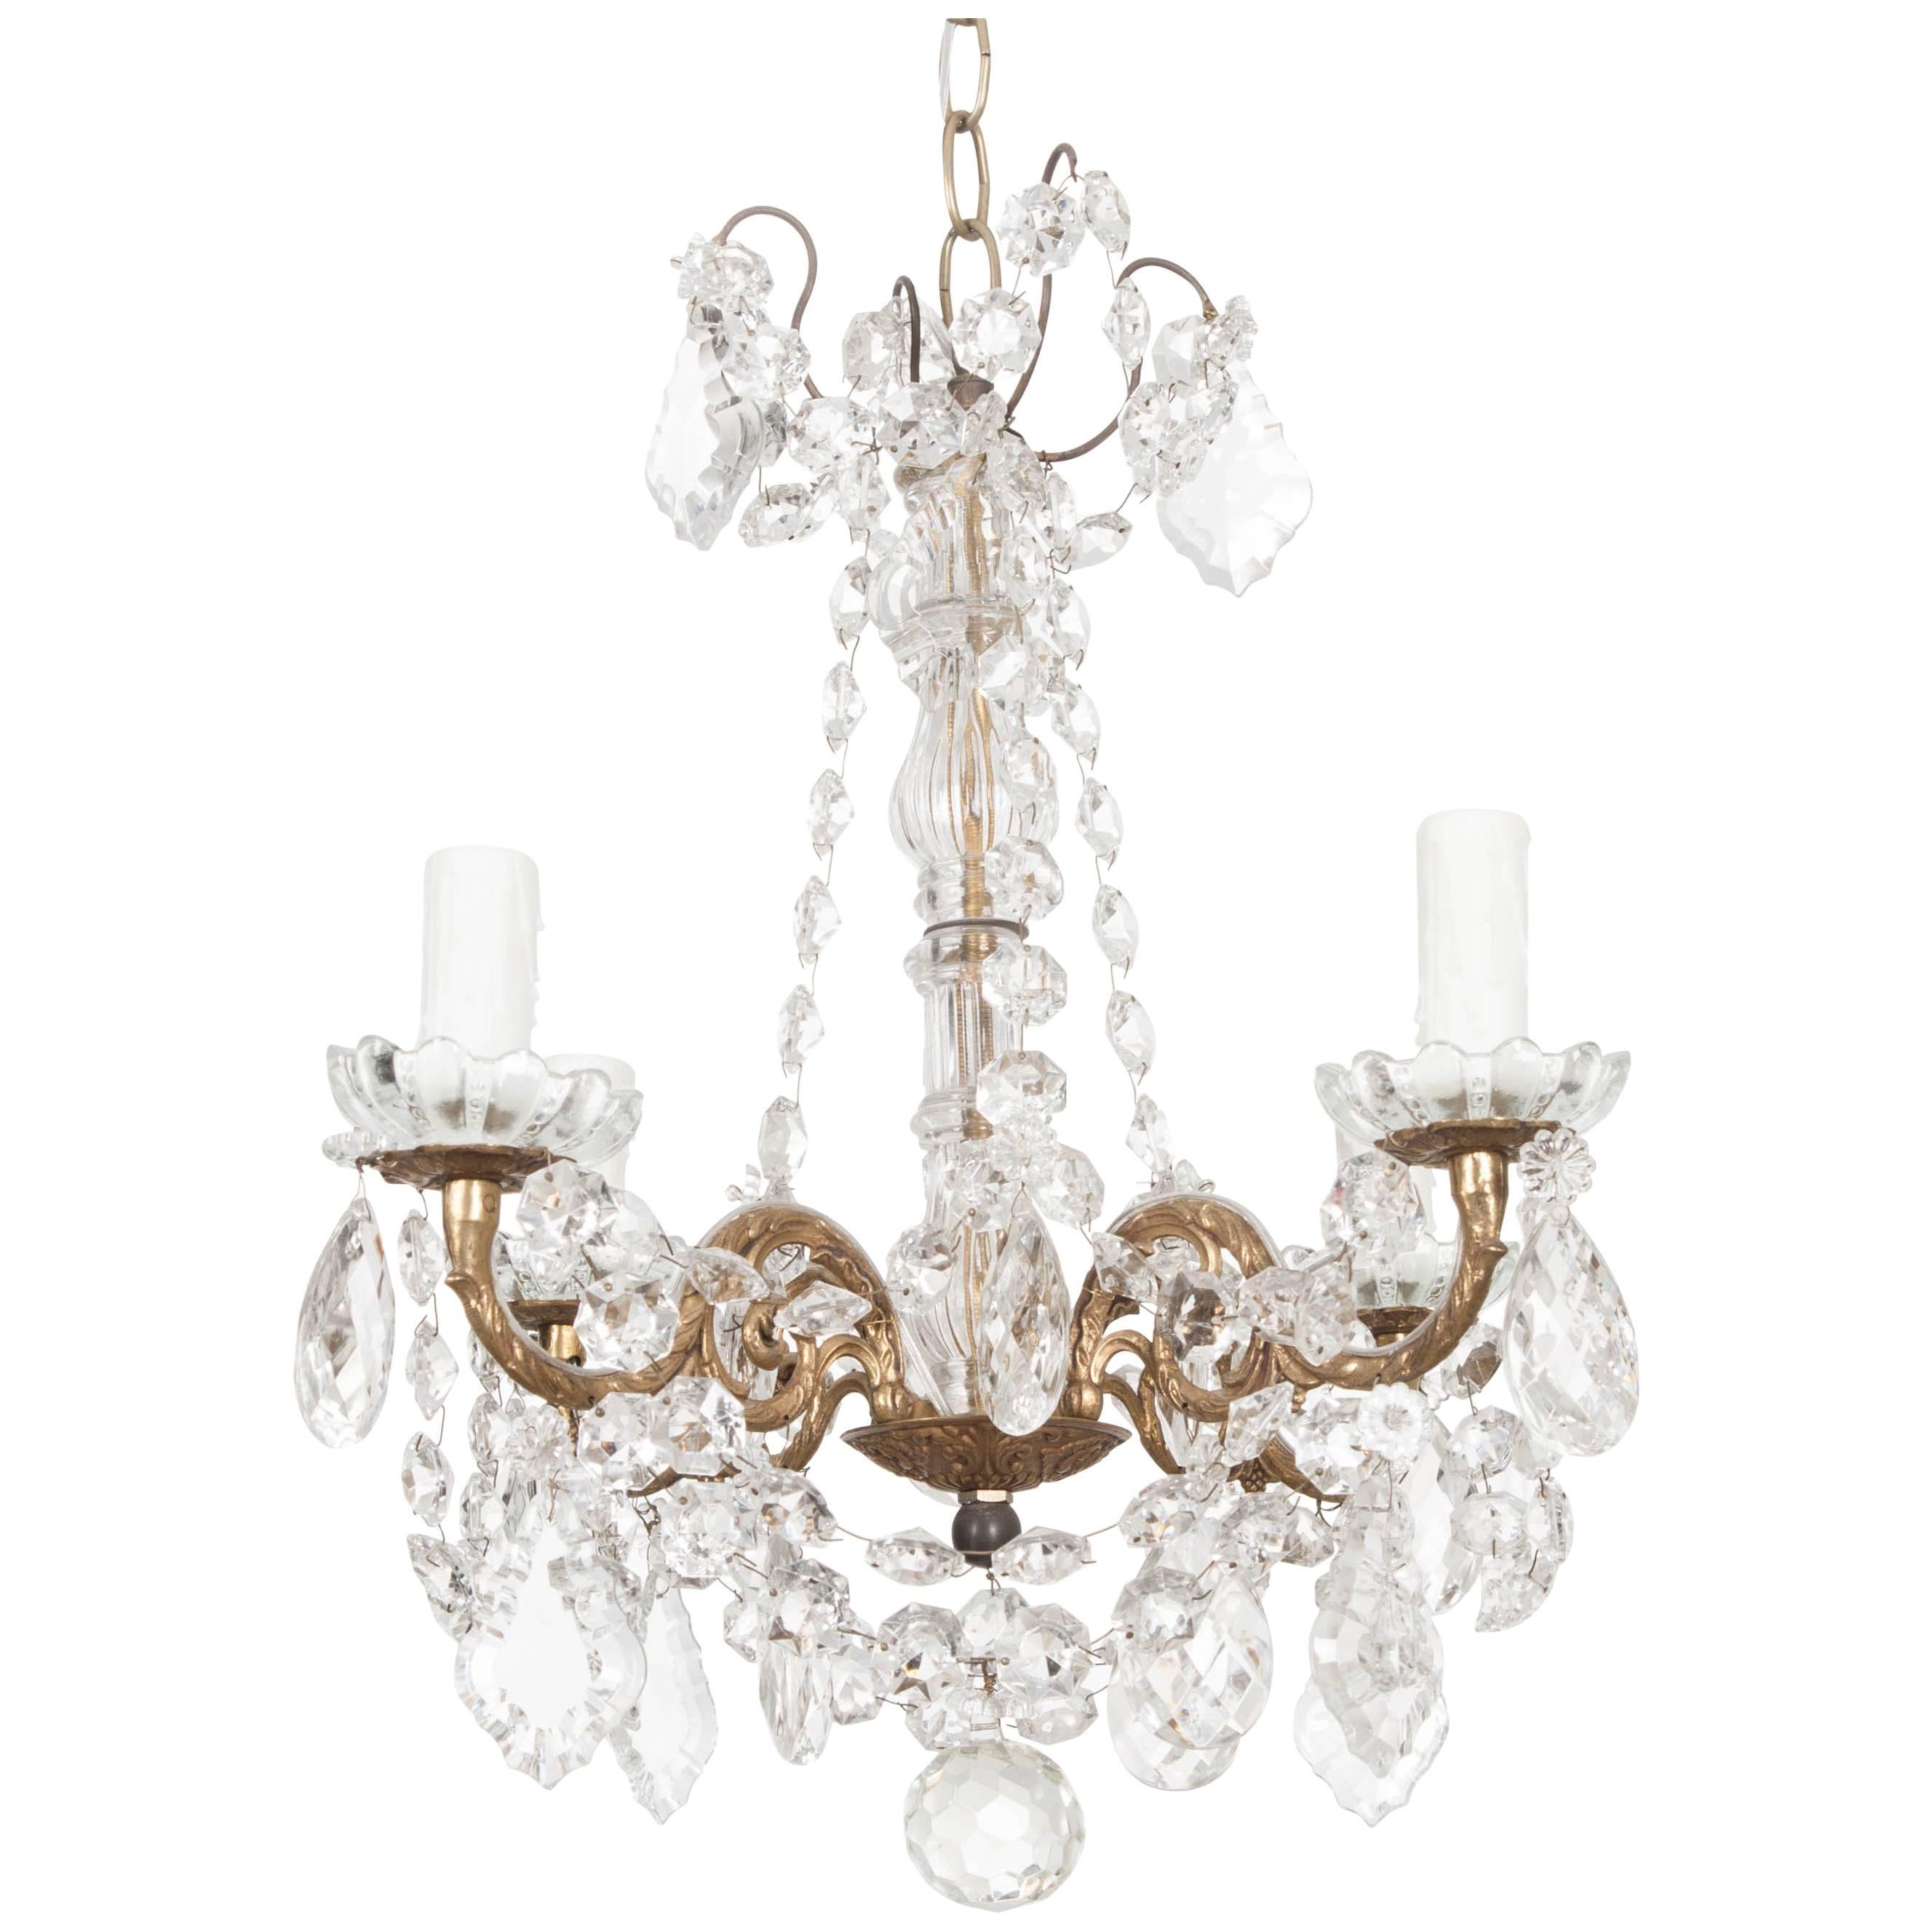 Petite French 19th Century Crystal and Brass Chandelier